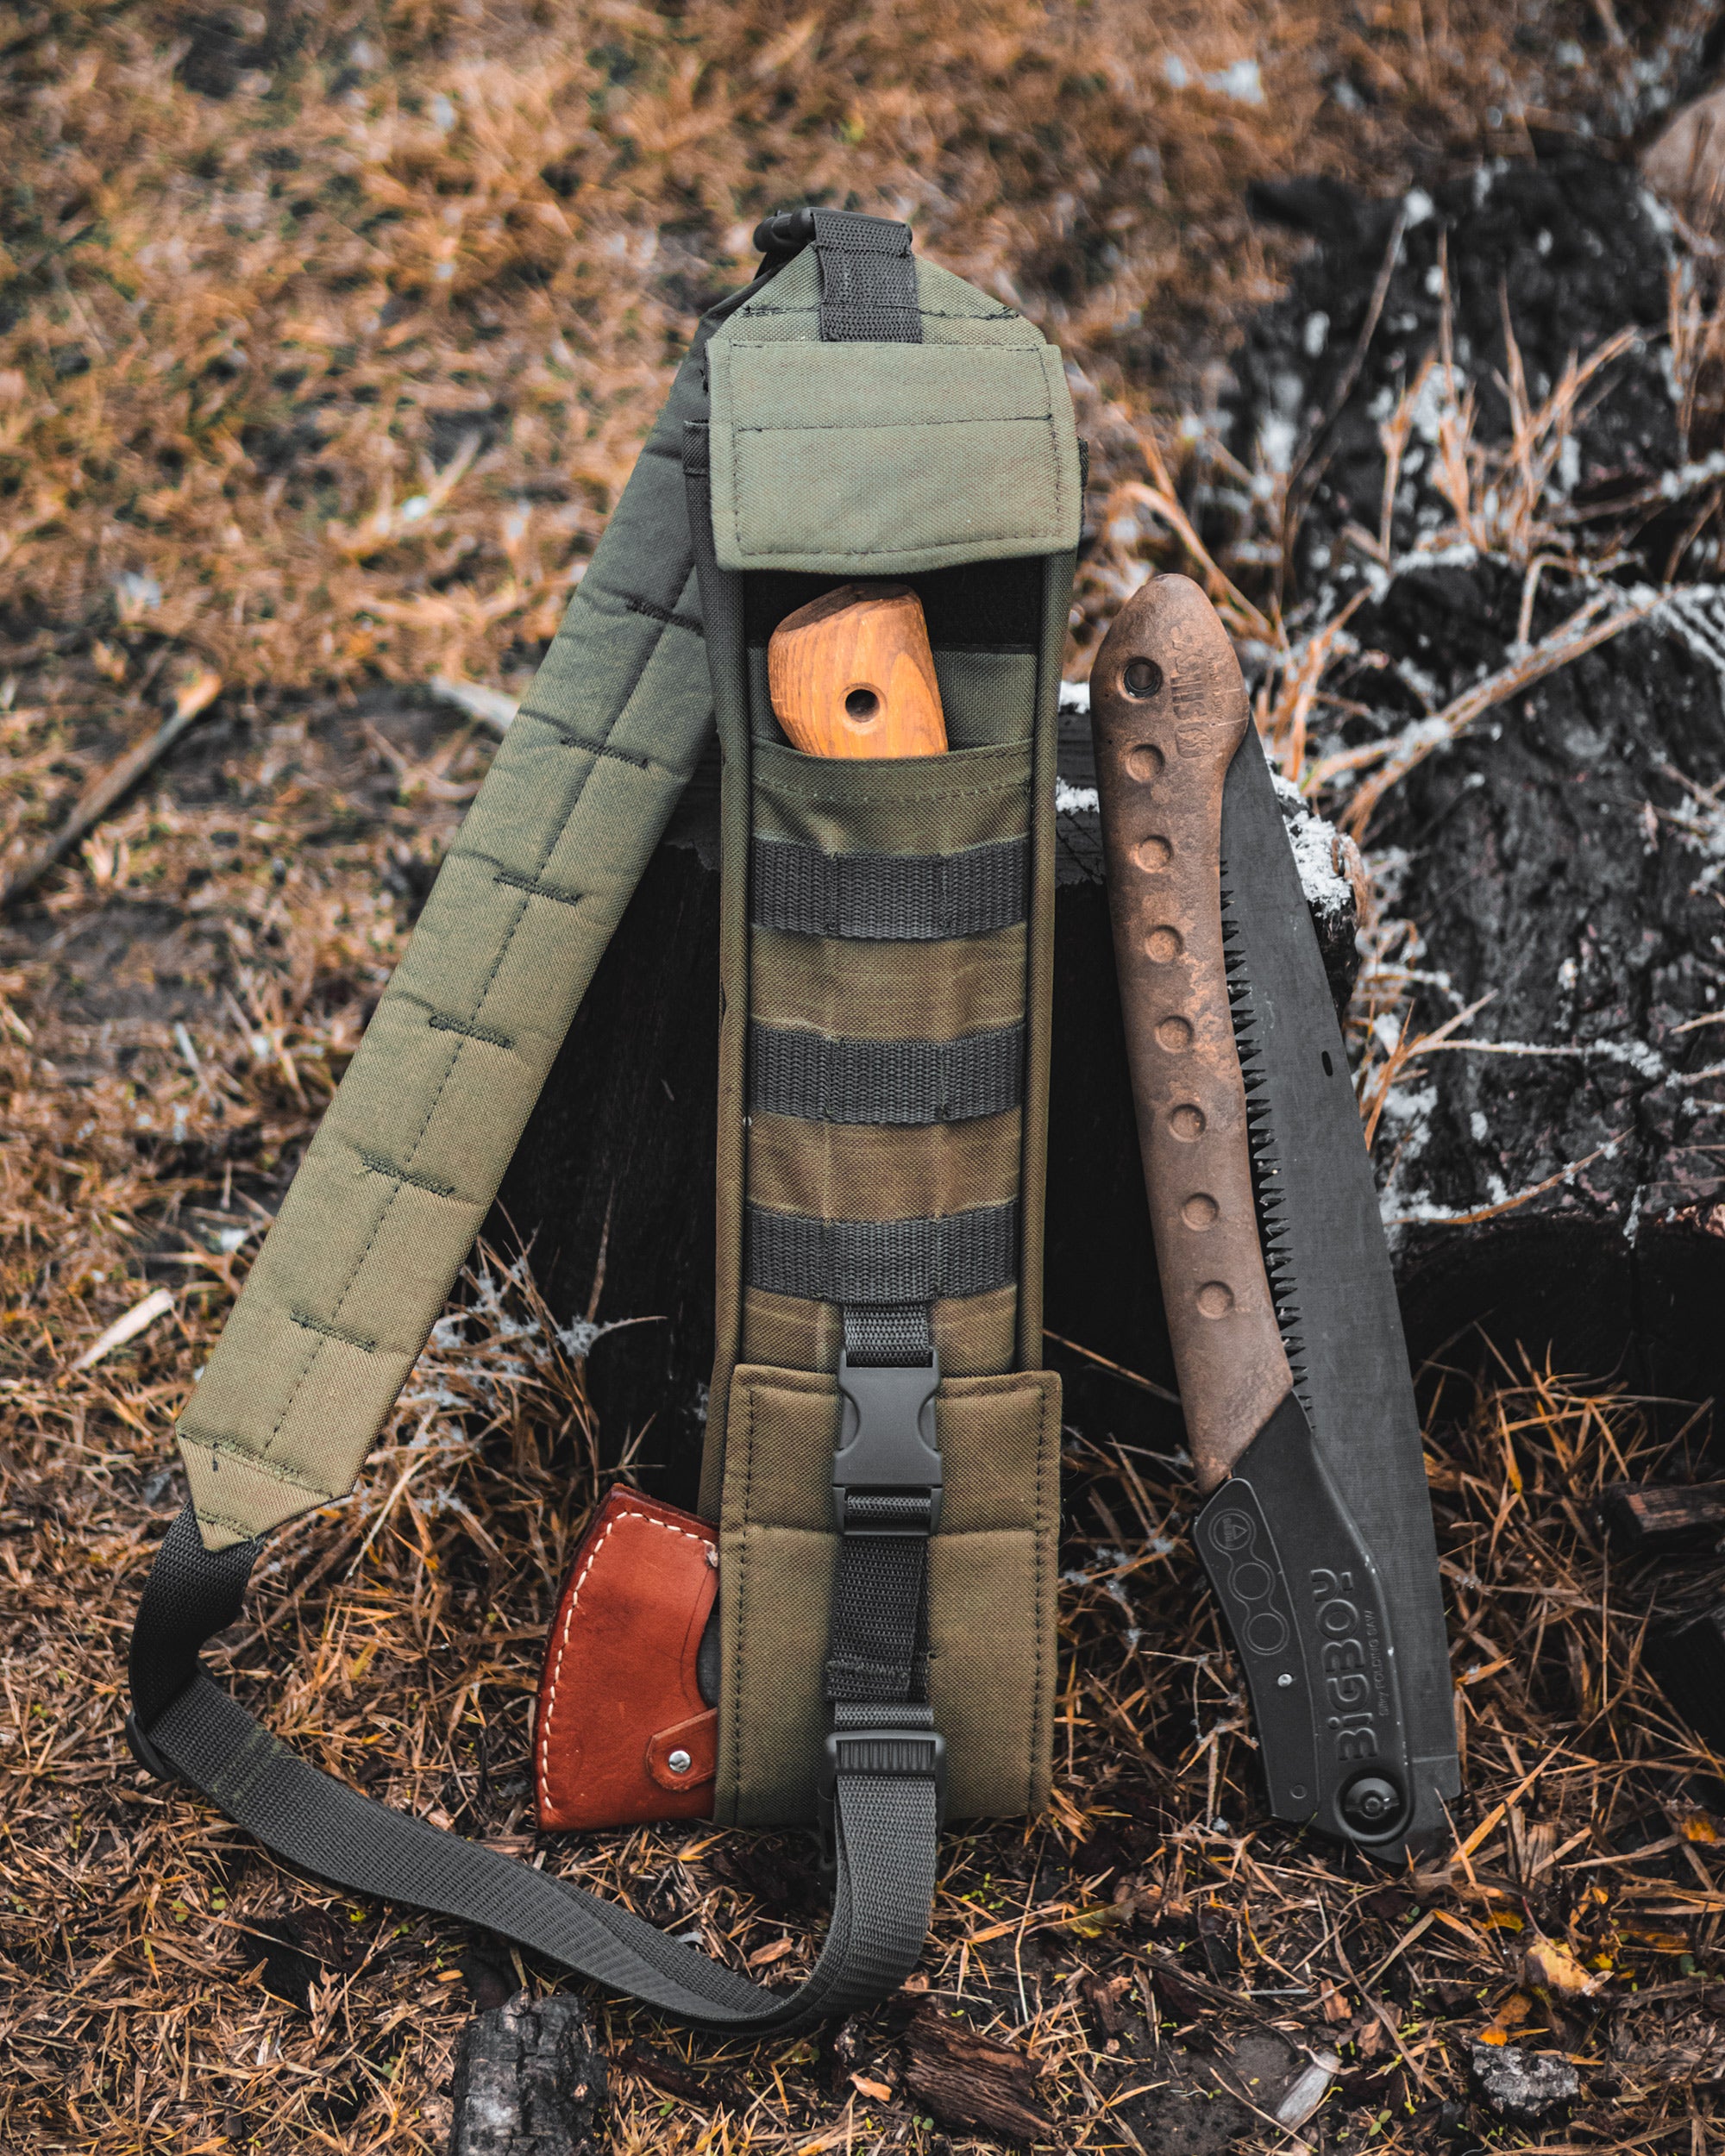 Unveiling the Ultimate Companion for Outdoorsmen: The Silky Bigboy 2000 and Small Forest Axe Shoulder Carry Case